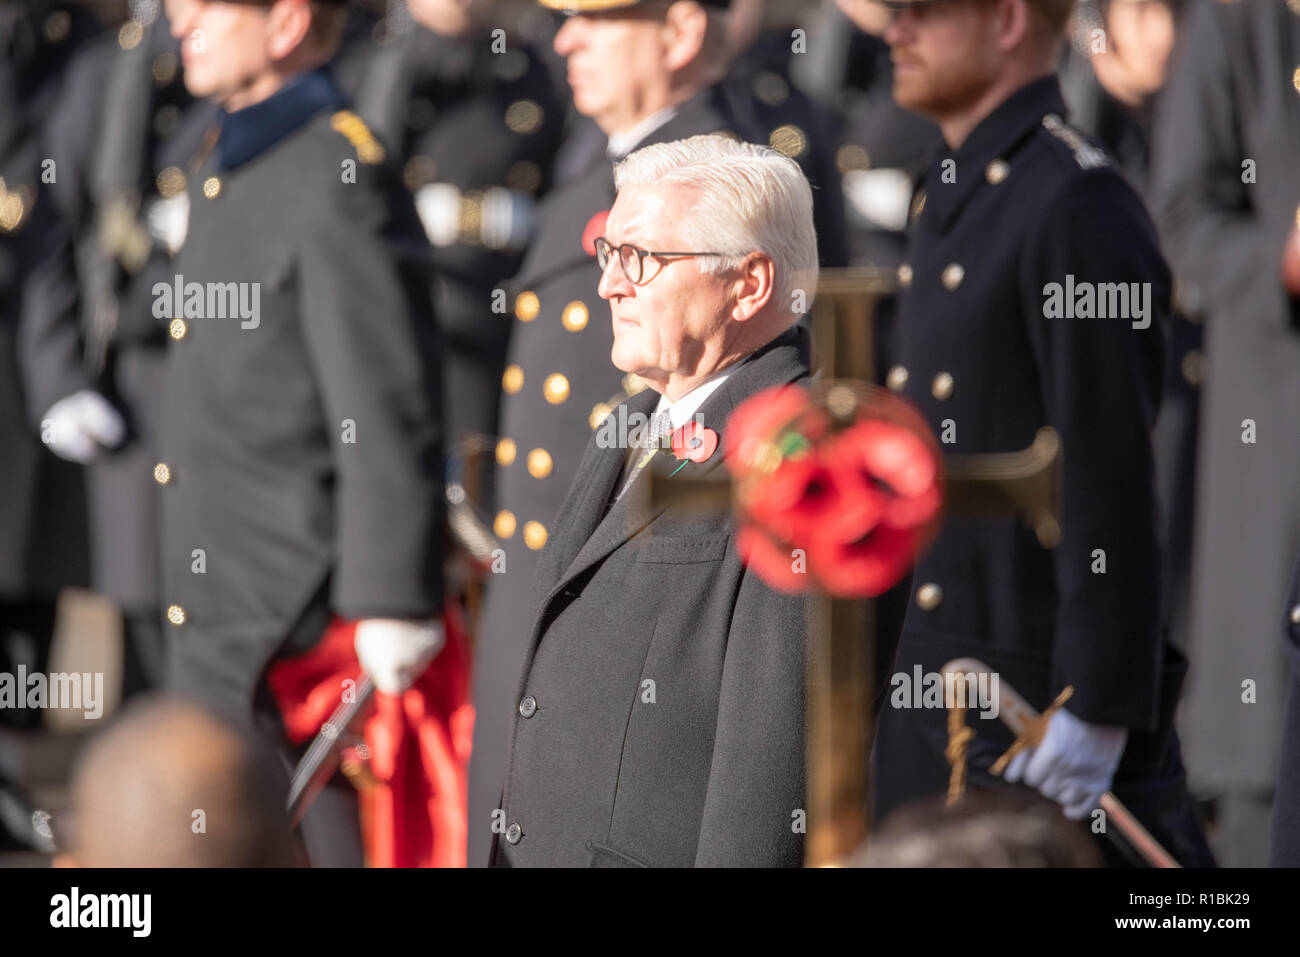 London UK, 11th November 2018  The National Service of Remembrance  at the Cenotaph London on Remembrance Sunday in the presence of HM The Queen, the Prime Minster, Theresa May, former prime ministers, senior government ministers  and representatives of the Commenwealth HE The President of the Federal Republic of Germany Frank -Walter Steinmeiser Credit Ian Davidson/Alamy Live News Stock Photo